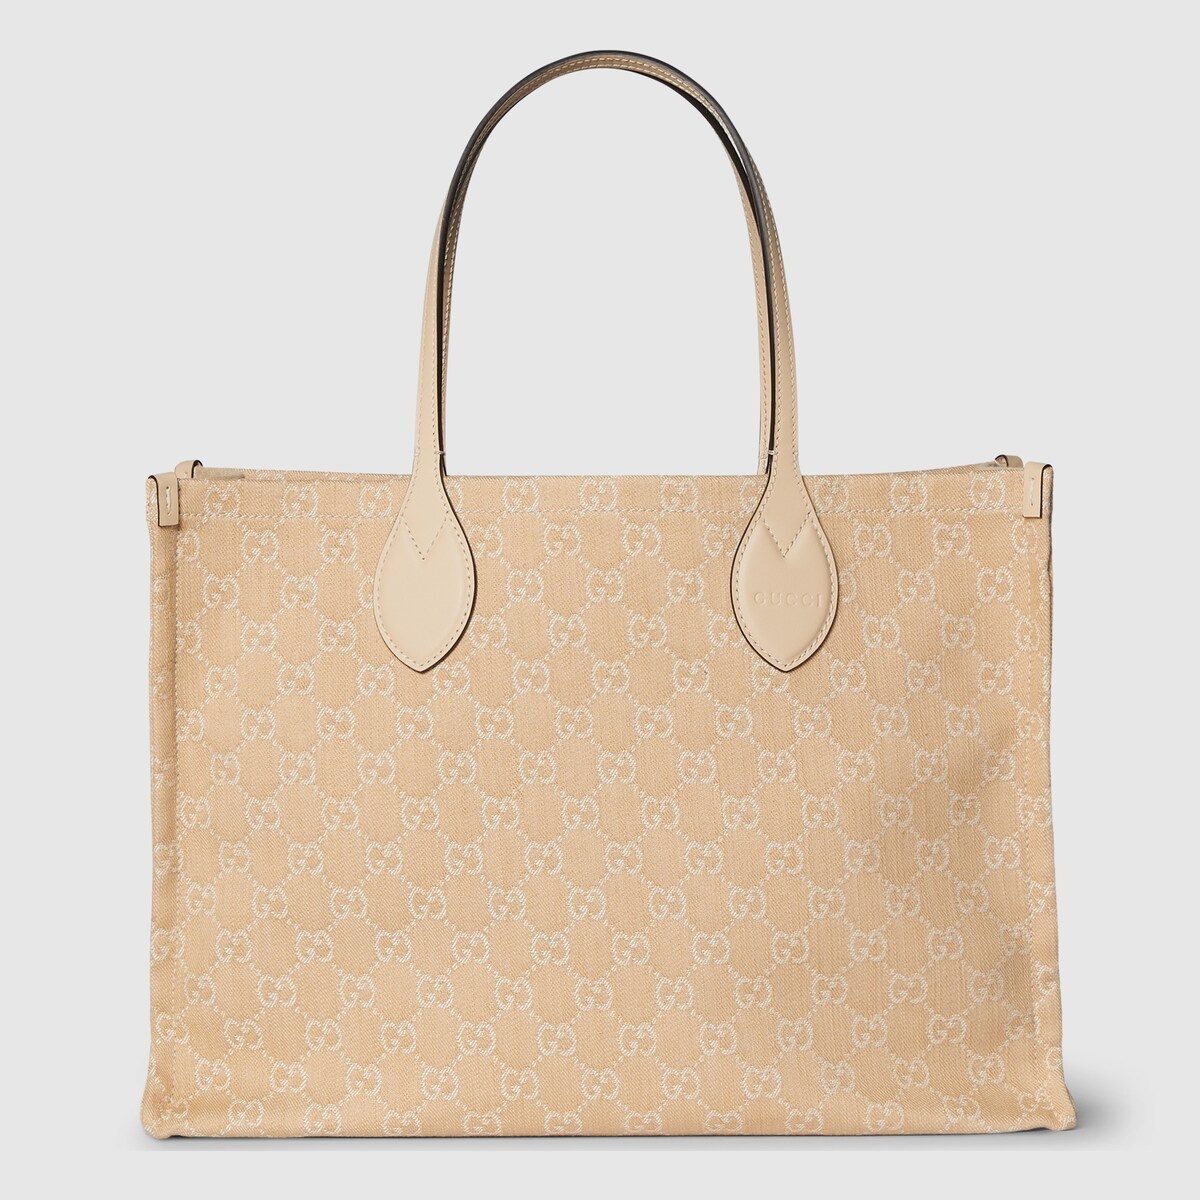 Ophidia GG large tote bag - 5